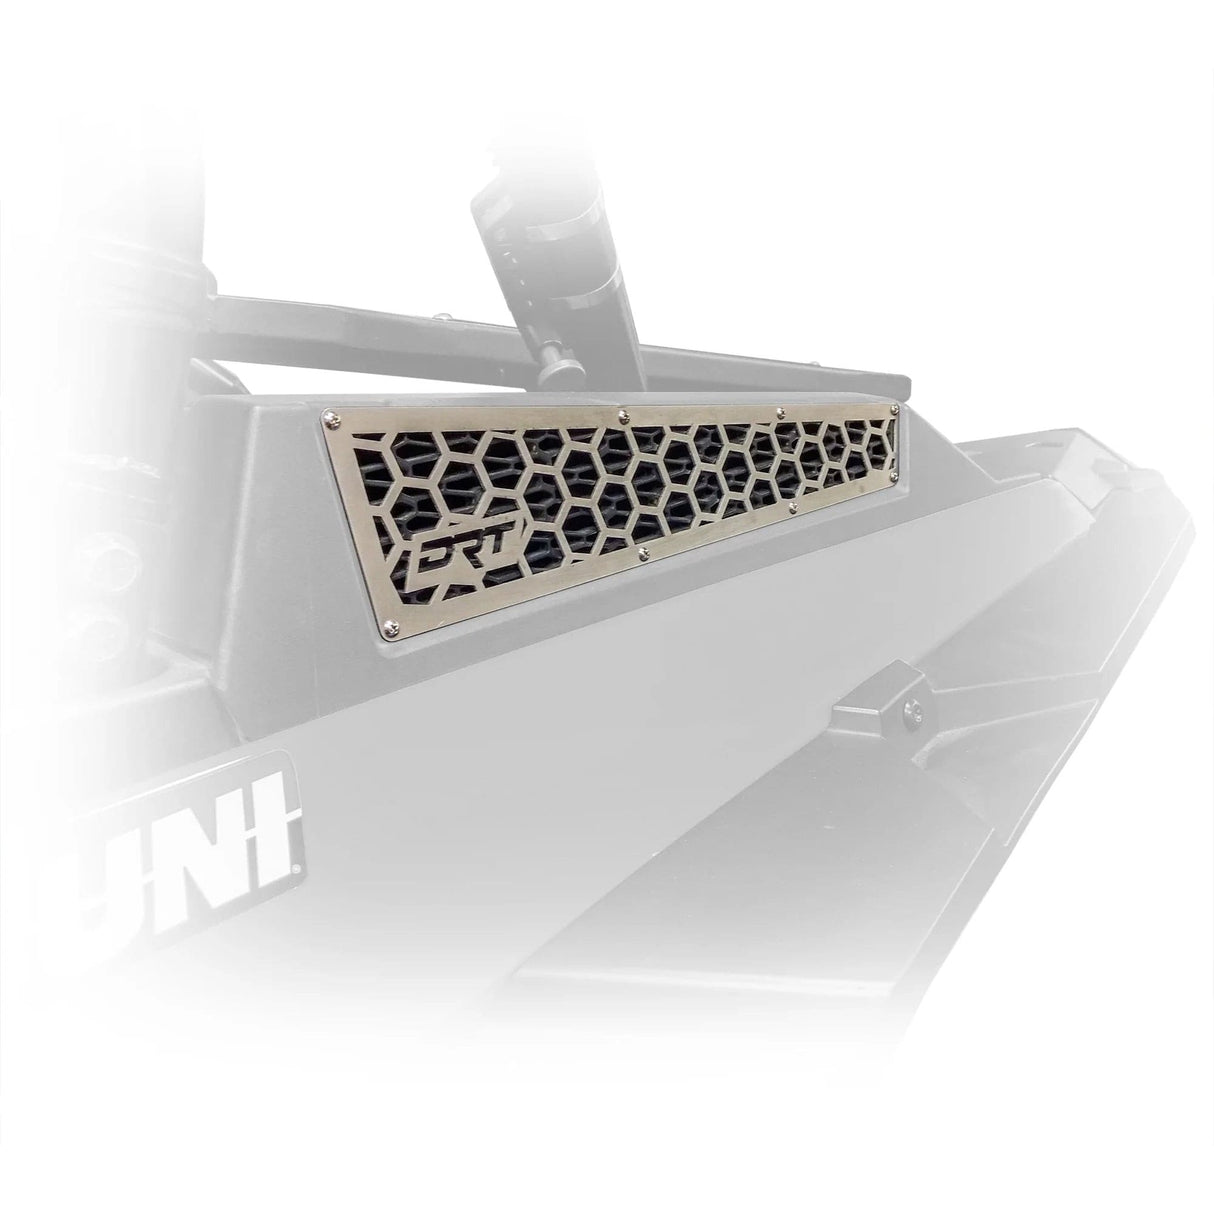 RZR XP 1000 2014+ Air Intake Vent Grille - R1 Industries